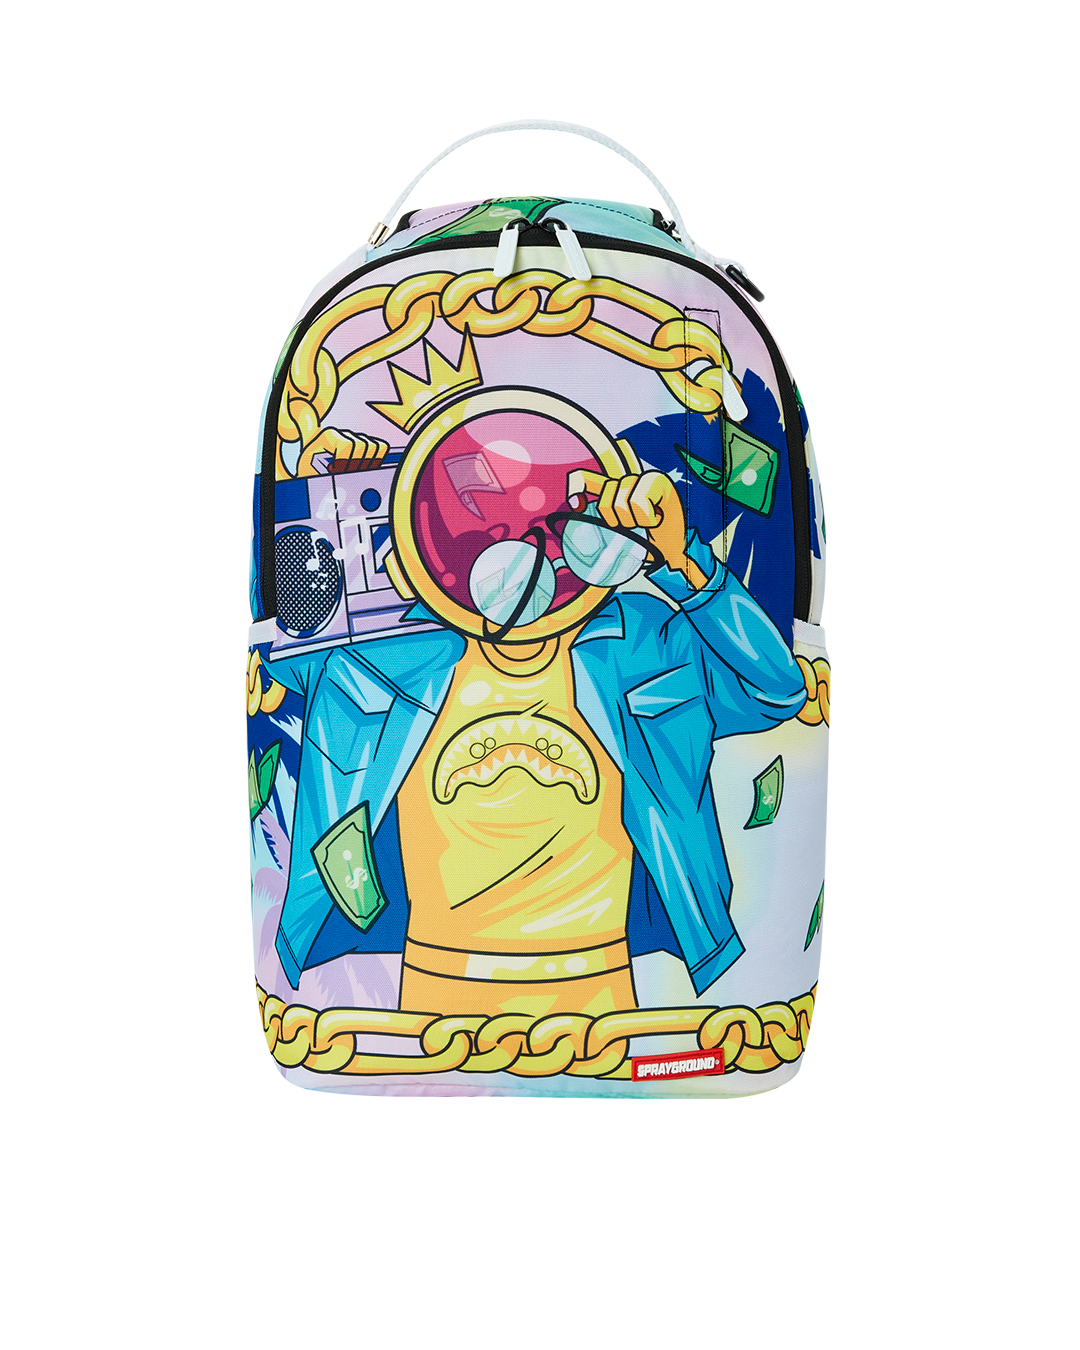 Sprayground give me my space backpack